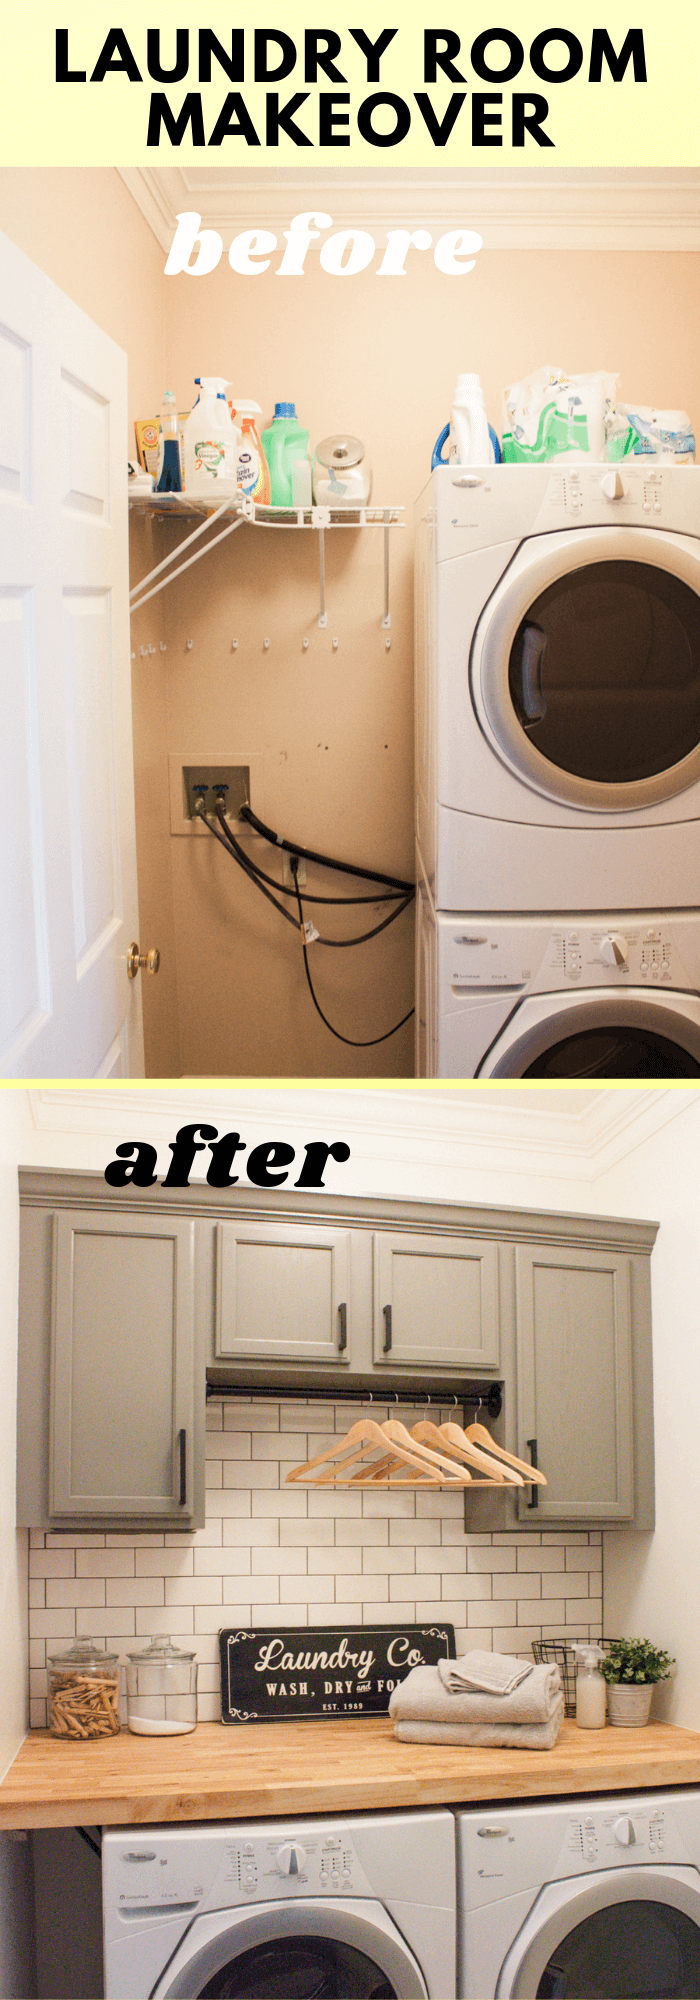 Modern farmhouse laundry makeover: A counter top to fold clothes and laundry baskets